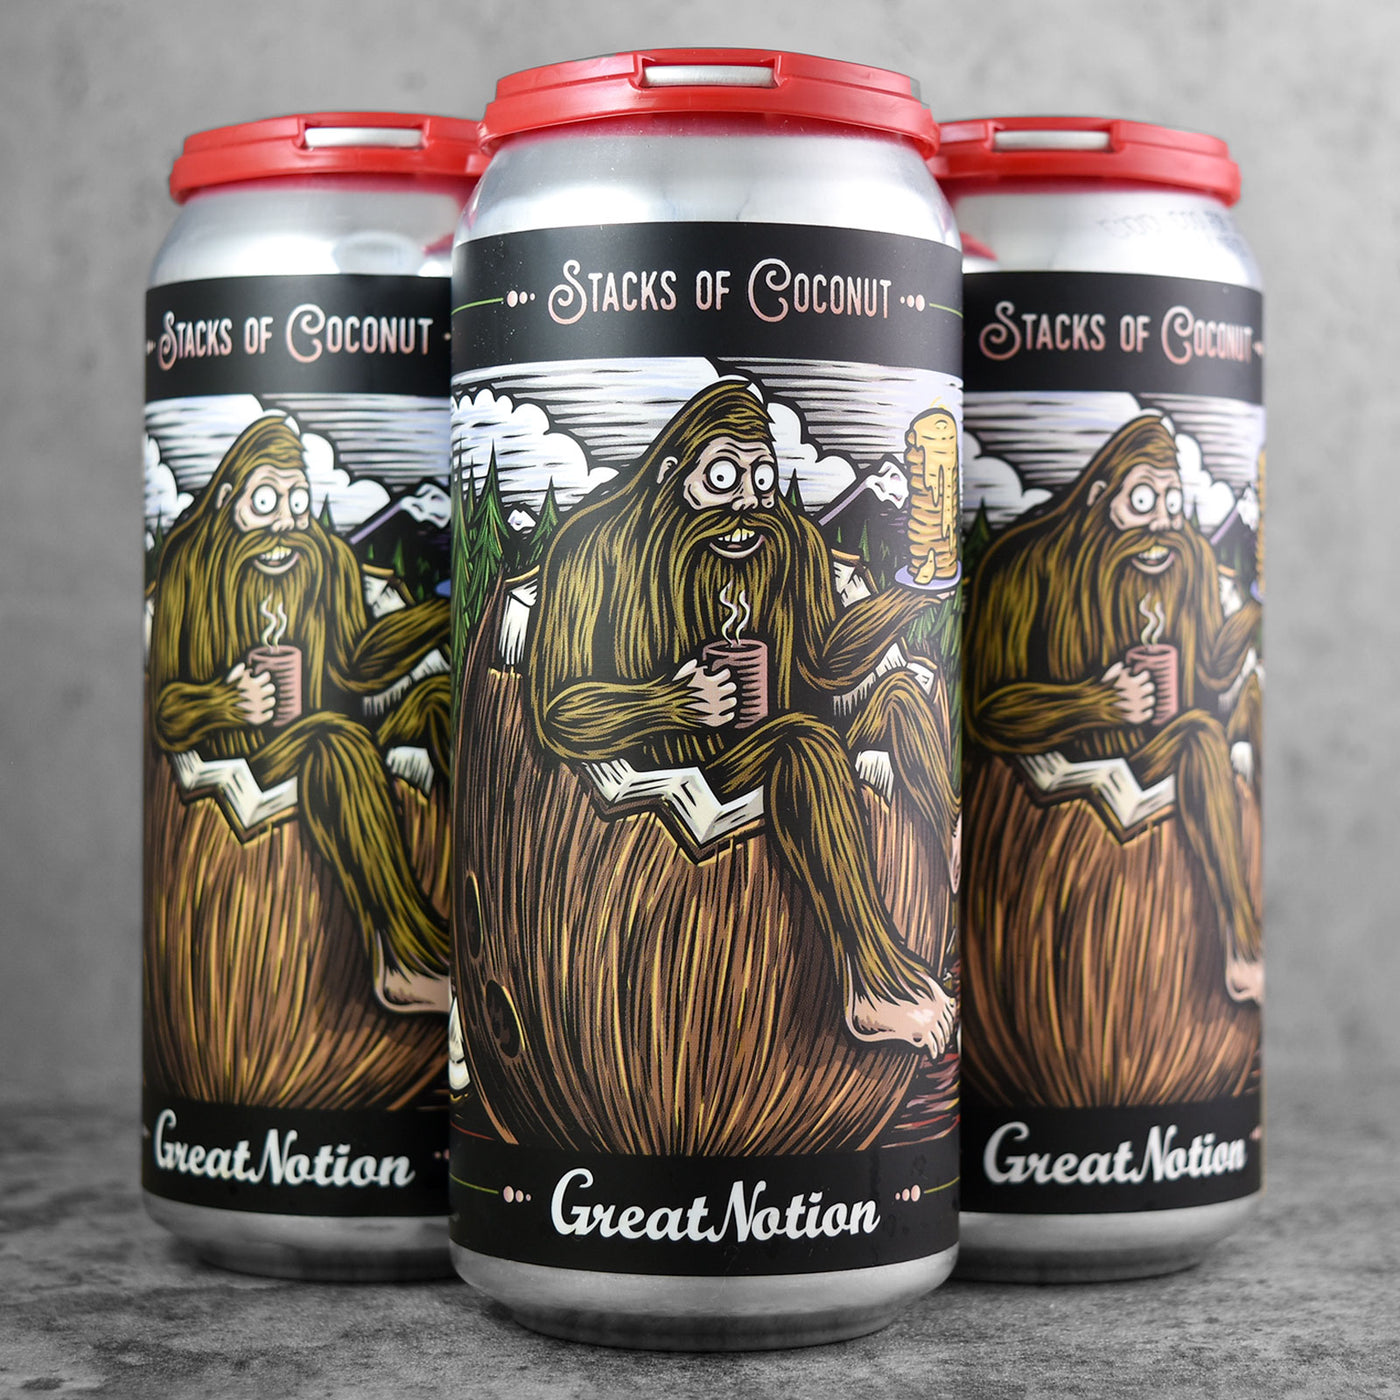 Great Notion Stacks of Coconut